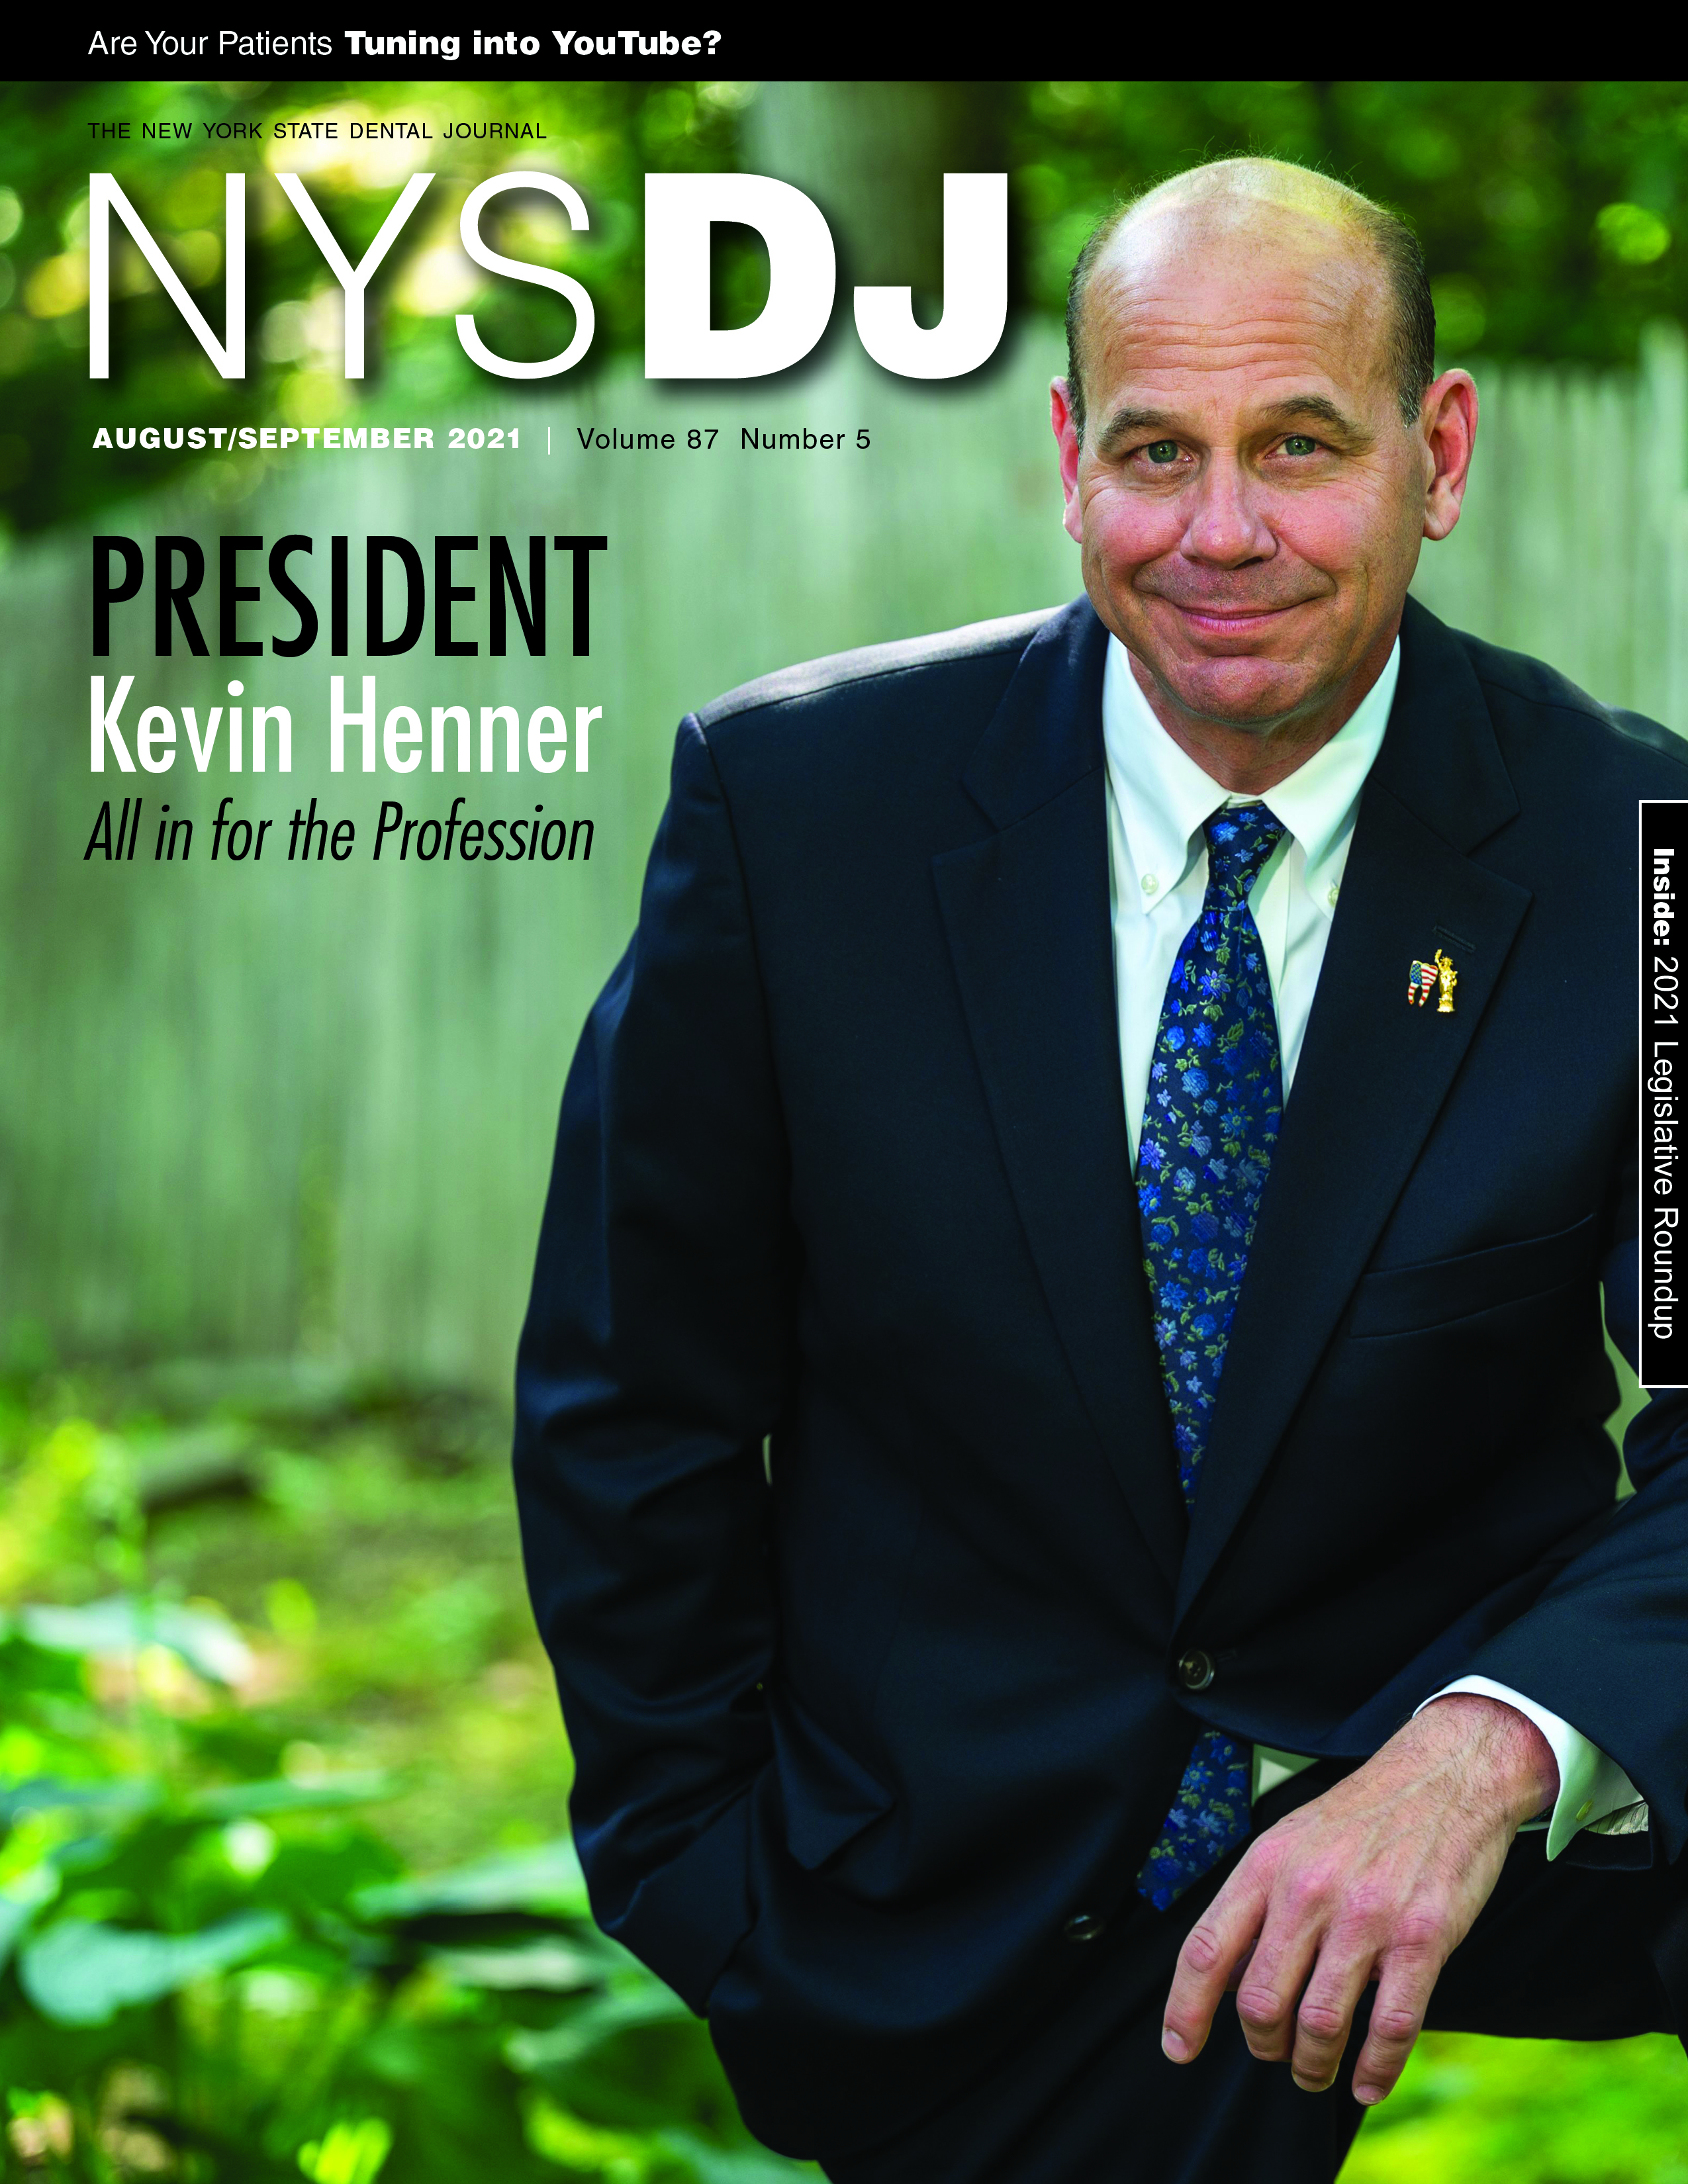 Cover of the NYSDJ with a photo of NYSDA president Kevin Henner